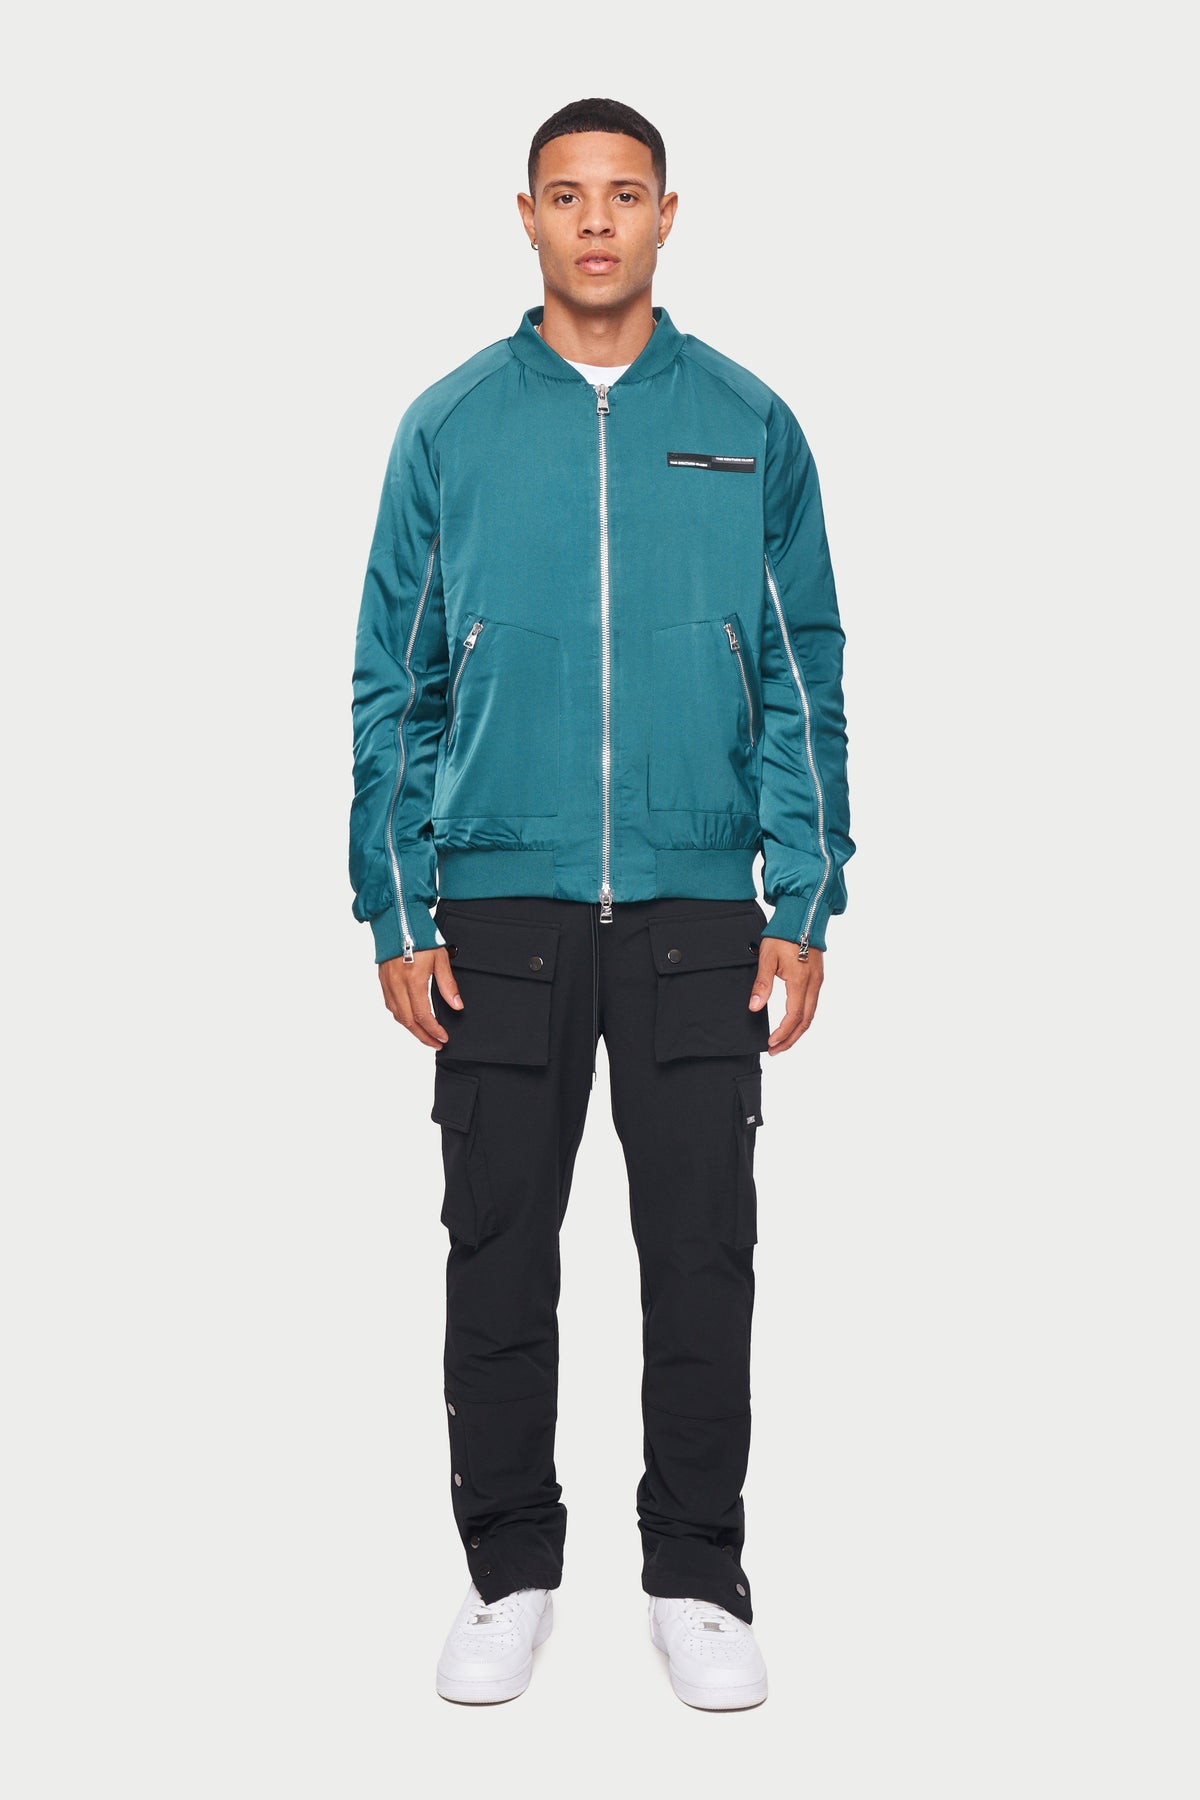 The Couture Club Satin Bomber Jacket in Teal Blue with Ruched Sleeve Detail